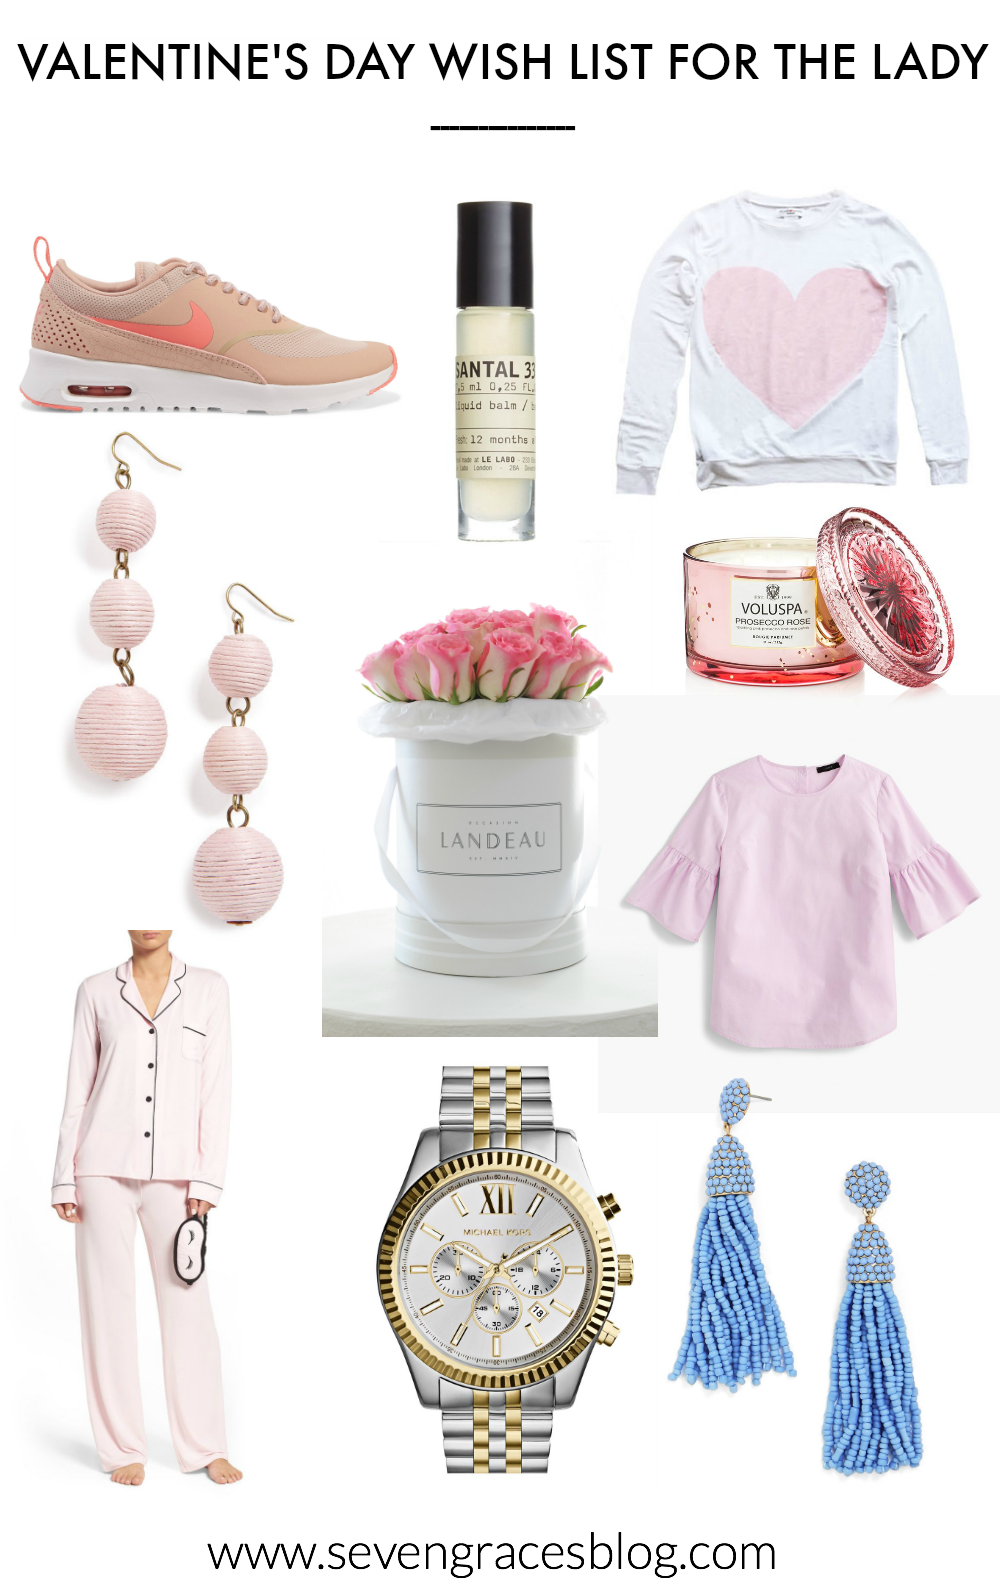 The cutest Valentine's Day wish list for the lady who never knows what to ask for. All things pink and pretty! Pretty and fresh gifts for the lovely lady. 